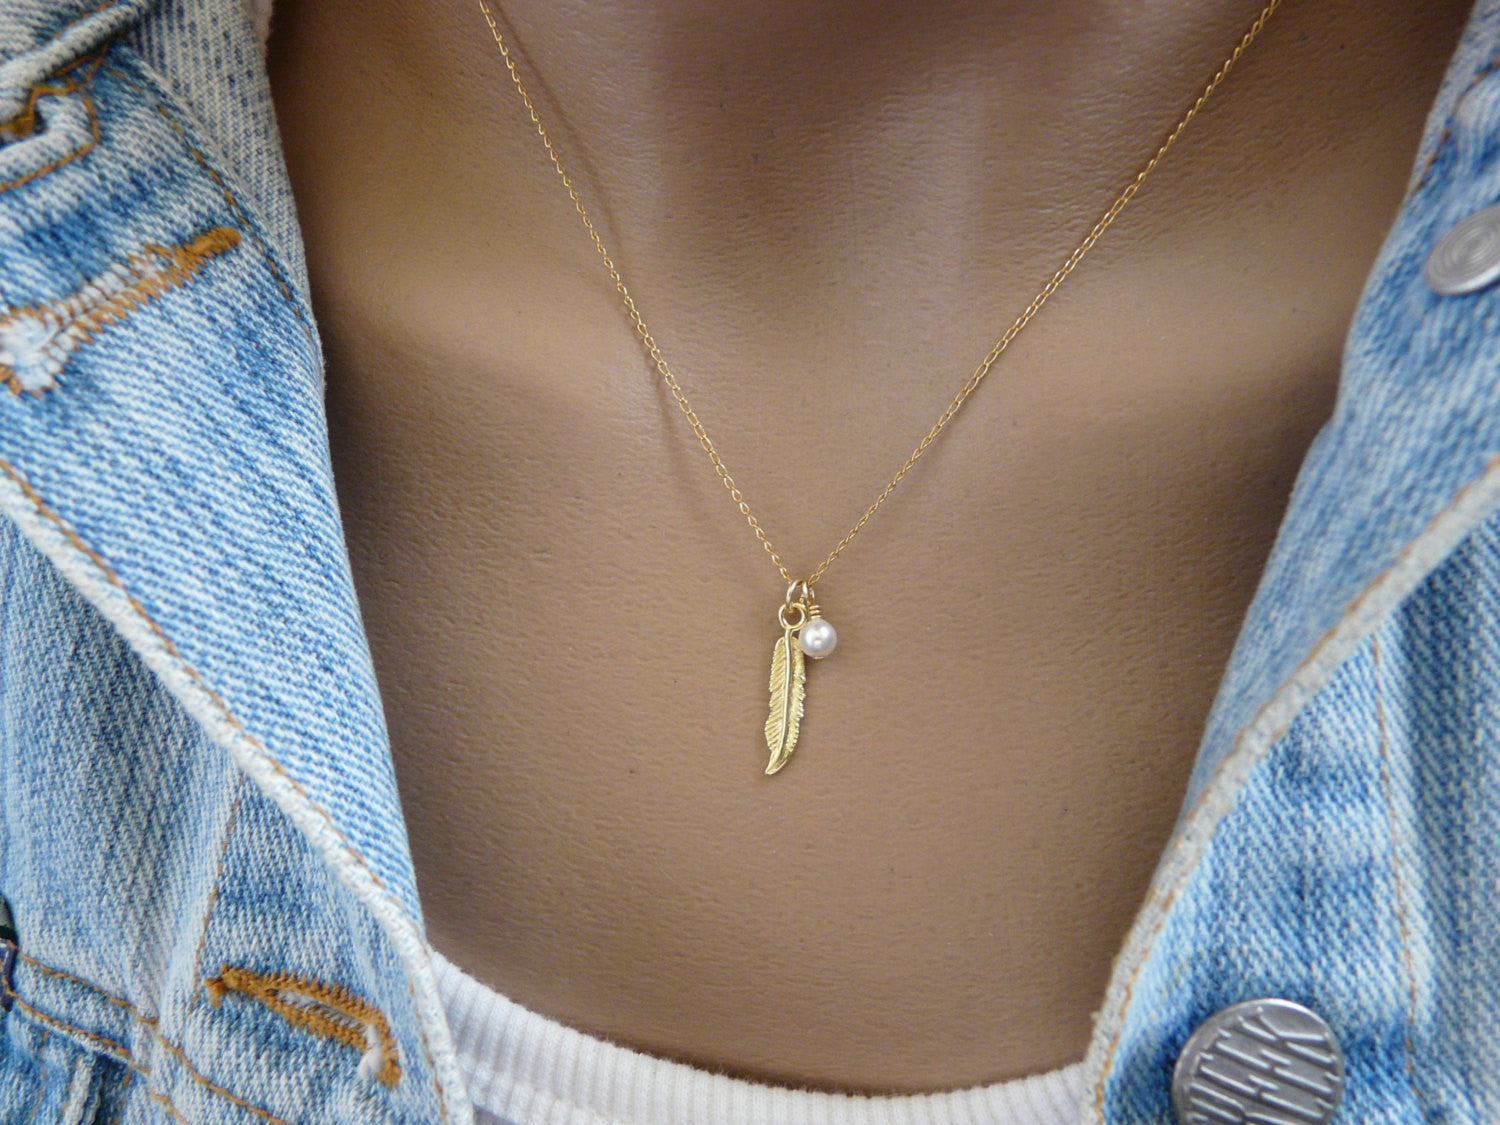 Feather necklace with Pearl - OpaLandJewelry